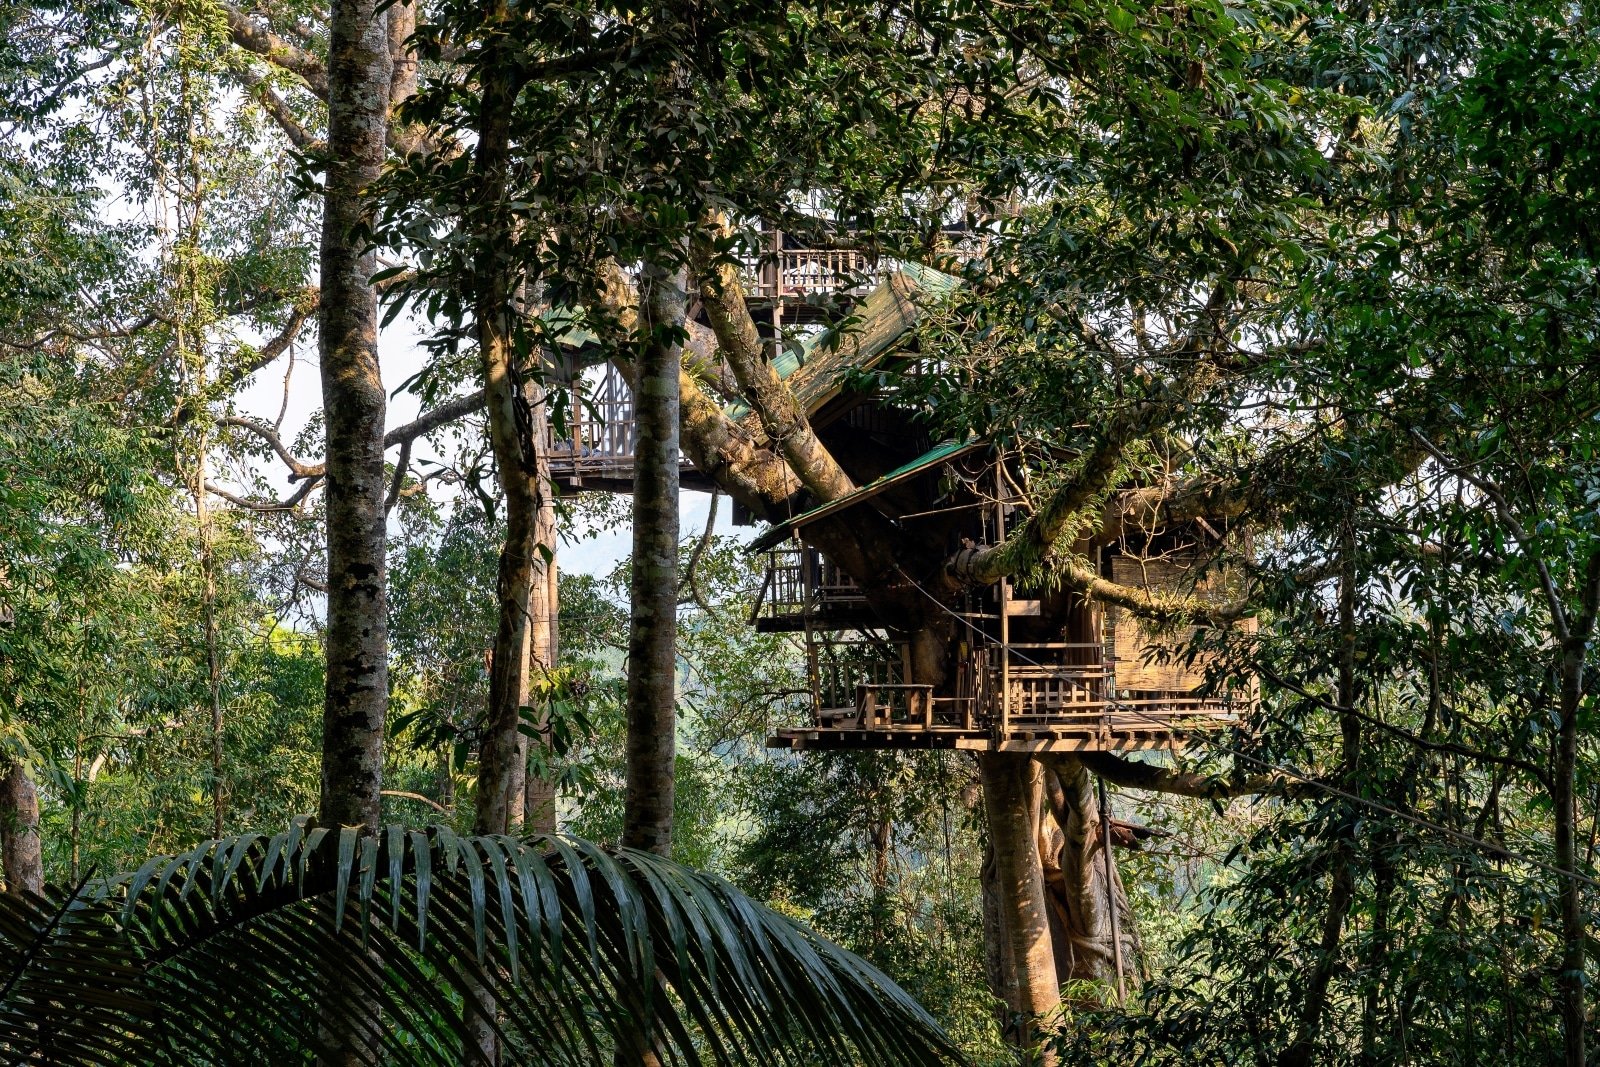 <p><span>The Gibbon Experience in Laos offers an adventurous treehouse stay in the heart of the Bokeo Nature Reserve. Accessible only by zip line, these treehouses are set high above the jungle floor, offering a unique vantage point to observe the surrounding wildlife, including gibbons.</span></p> <p><span>This eco-tourism project combines the thrill of zip-lining with conservation efforts, providing an adventurous yet responsible travel experience. The rustic treehouses enhance the sense of adventure and connection with nature. It’s an immersive experience, allowing you to live among the treetops and explore the jungle in a truly unique way.</span></p> <p><b>Insider’s Tip: </b><span>Book the Waterfall Treehouse for a more secluded and adventurous stay.</span></p> <p><b>When To Travel: </b><span>Visit from October to March for drier weather.</span></p> <p><b>How To Get There: </b><span>Fly to Luang Prabang or Chiang Rai, then travel by road to Houay Xai, where the Gibbon Experience begins.</span></p>